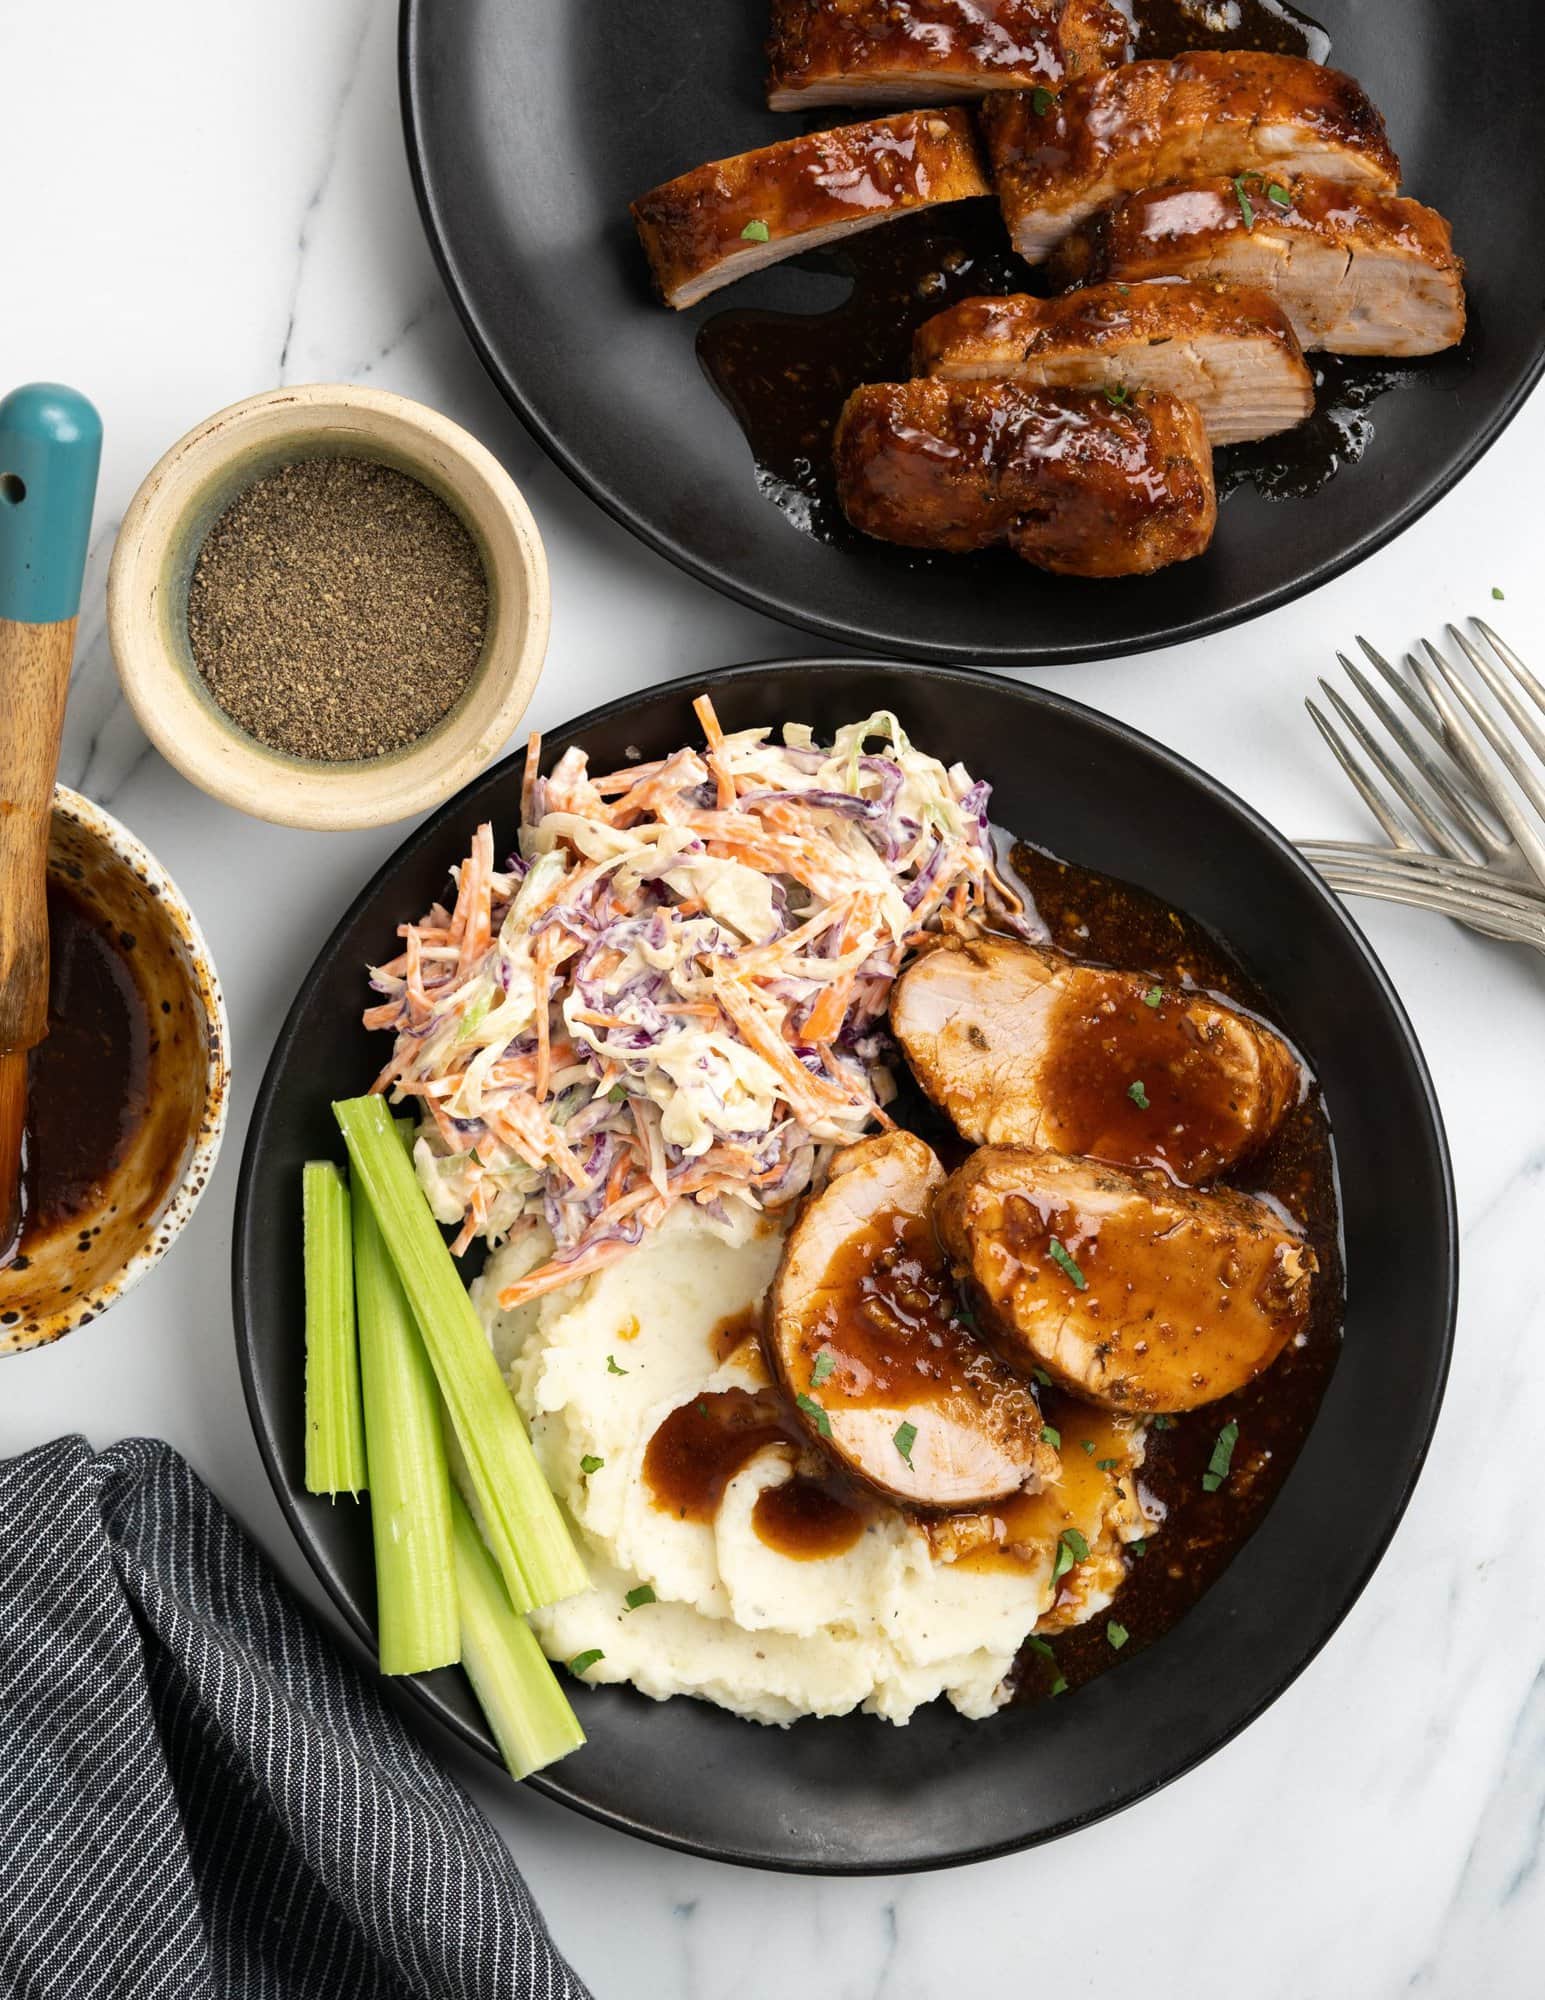 Baked pork tenderloin with a shiny BBQ glaze, served with mashed potatoes and coleslaw in a black plate.